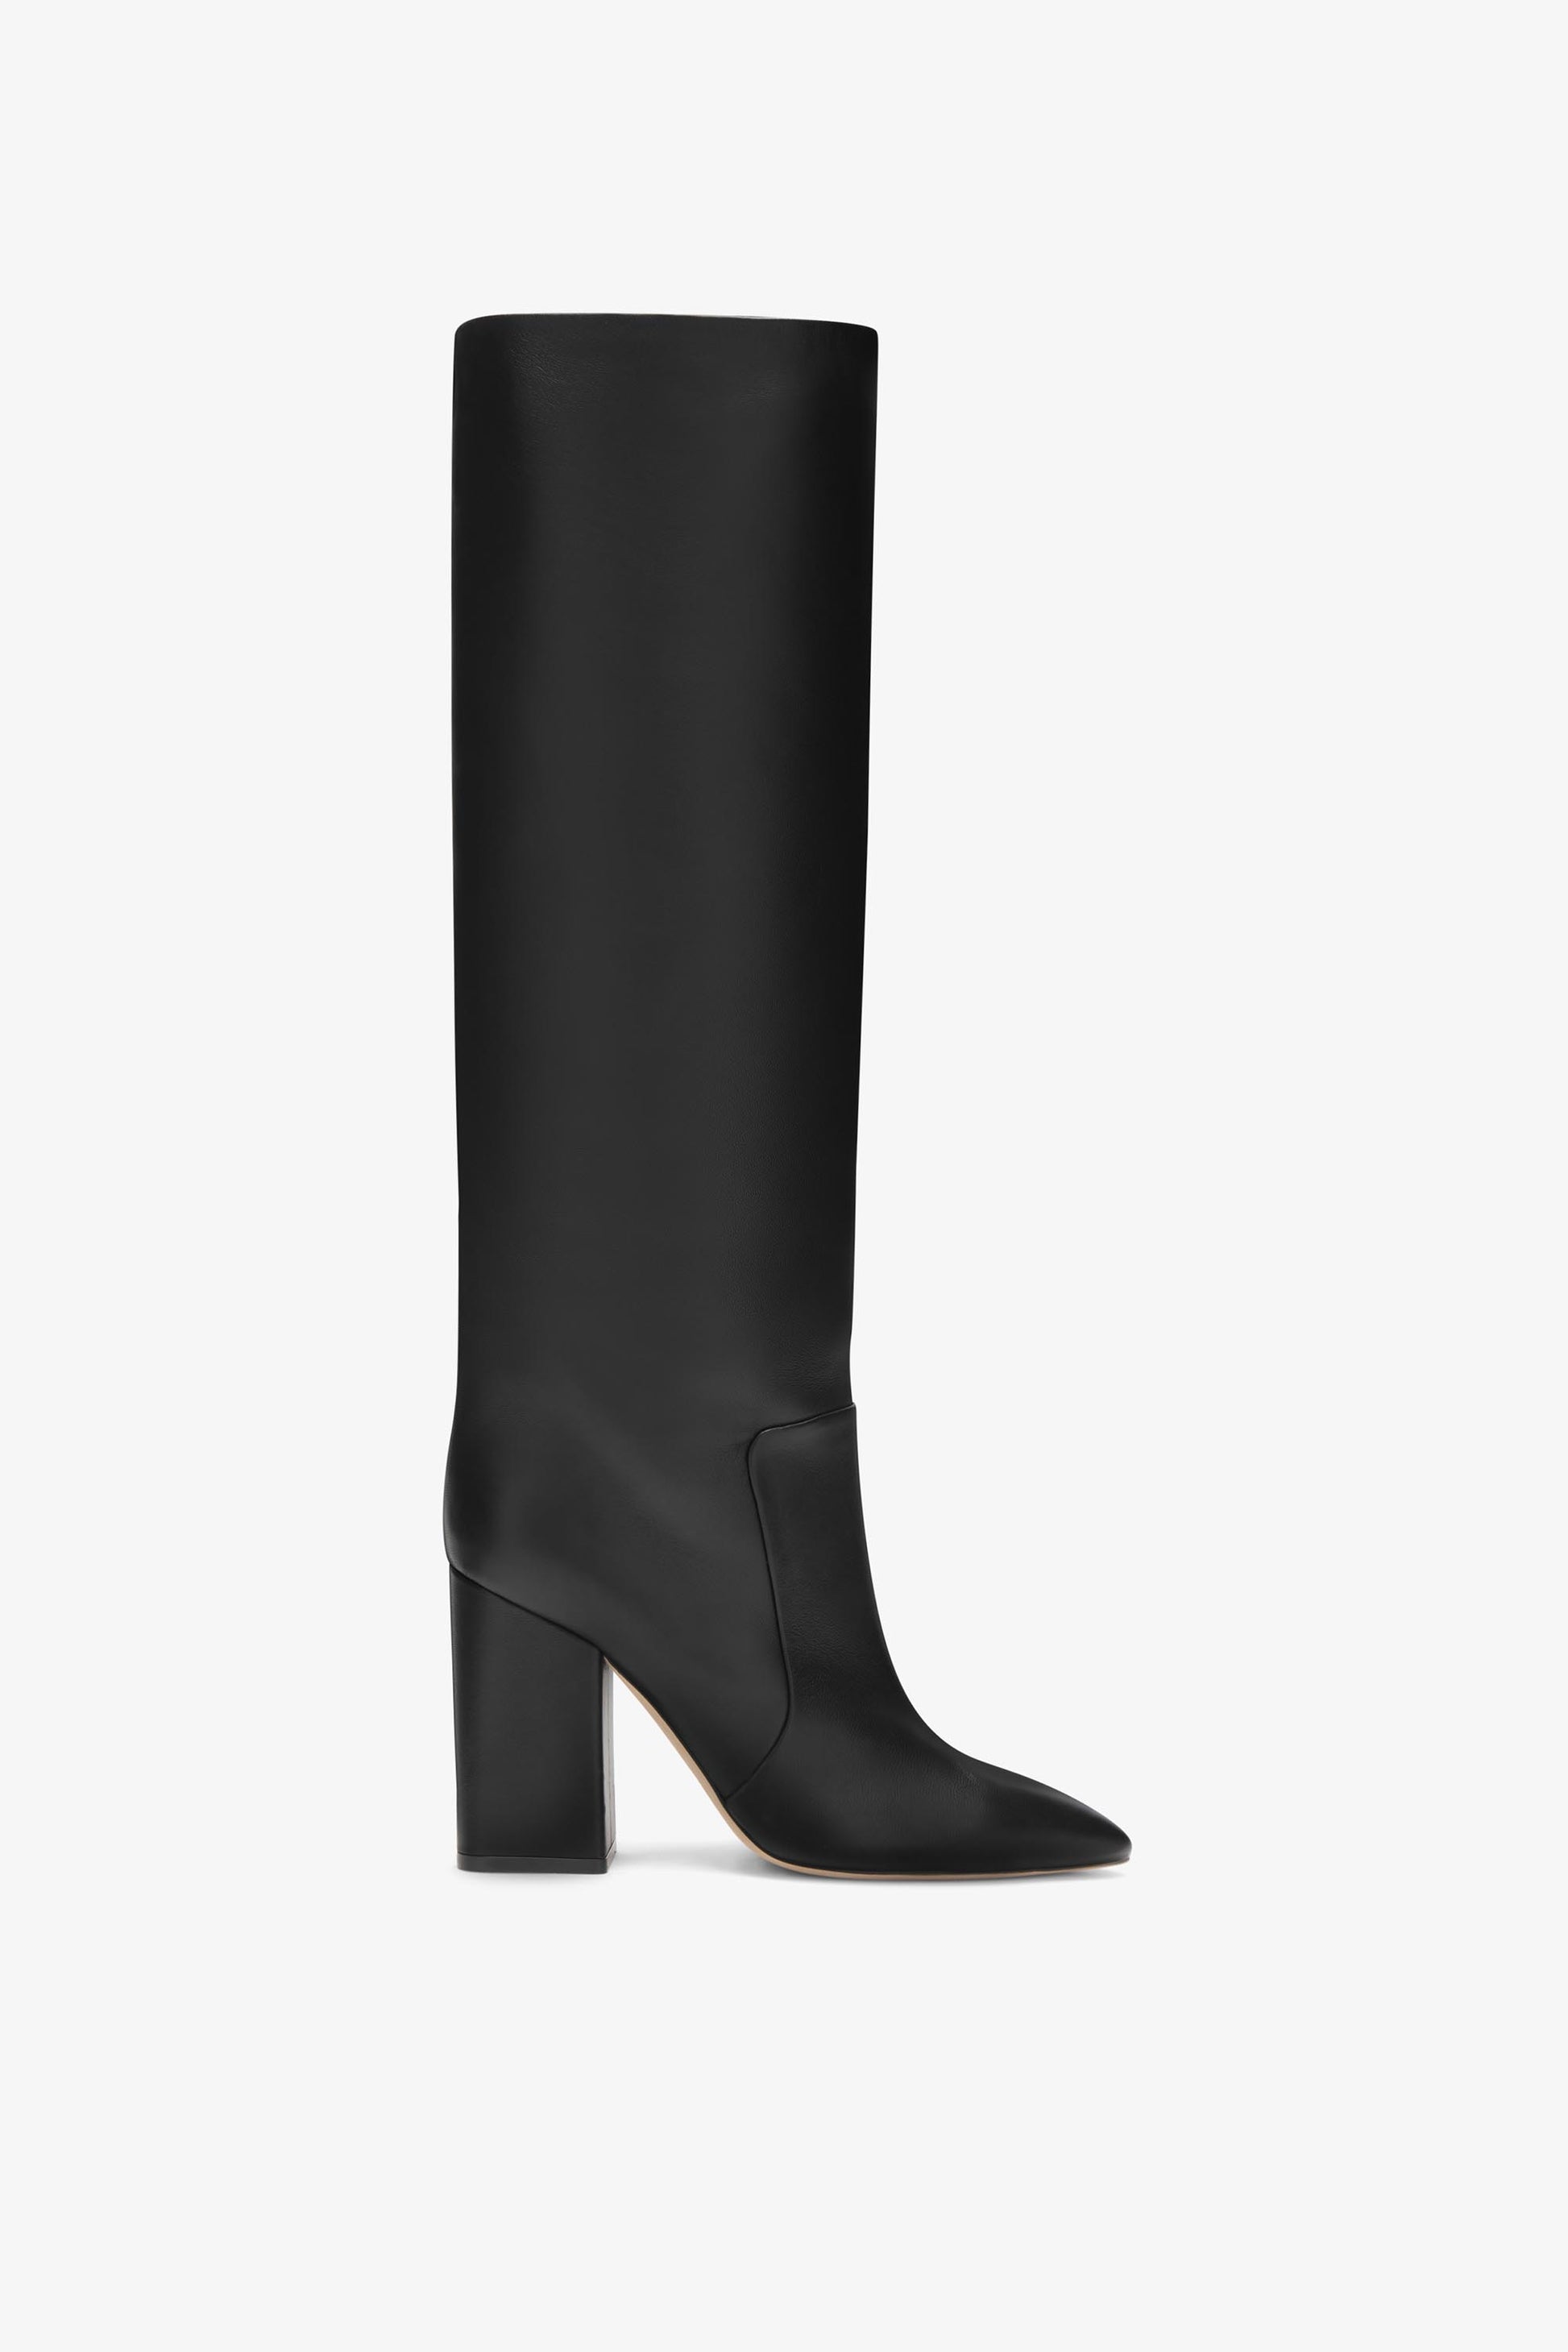 Black nappa leather boots